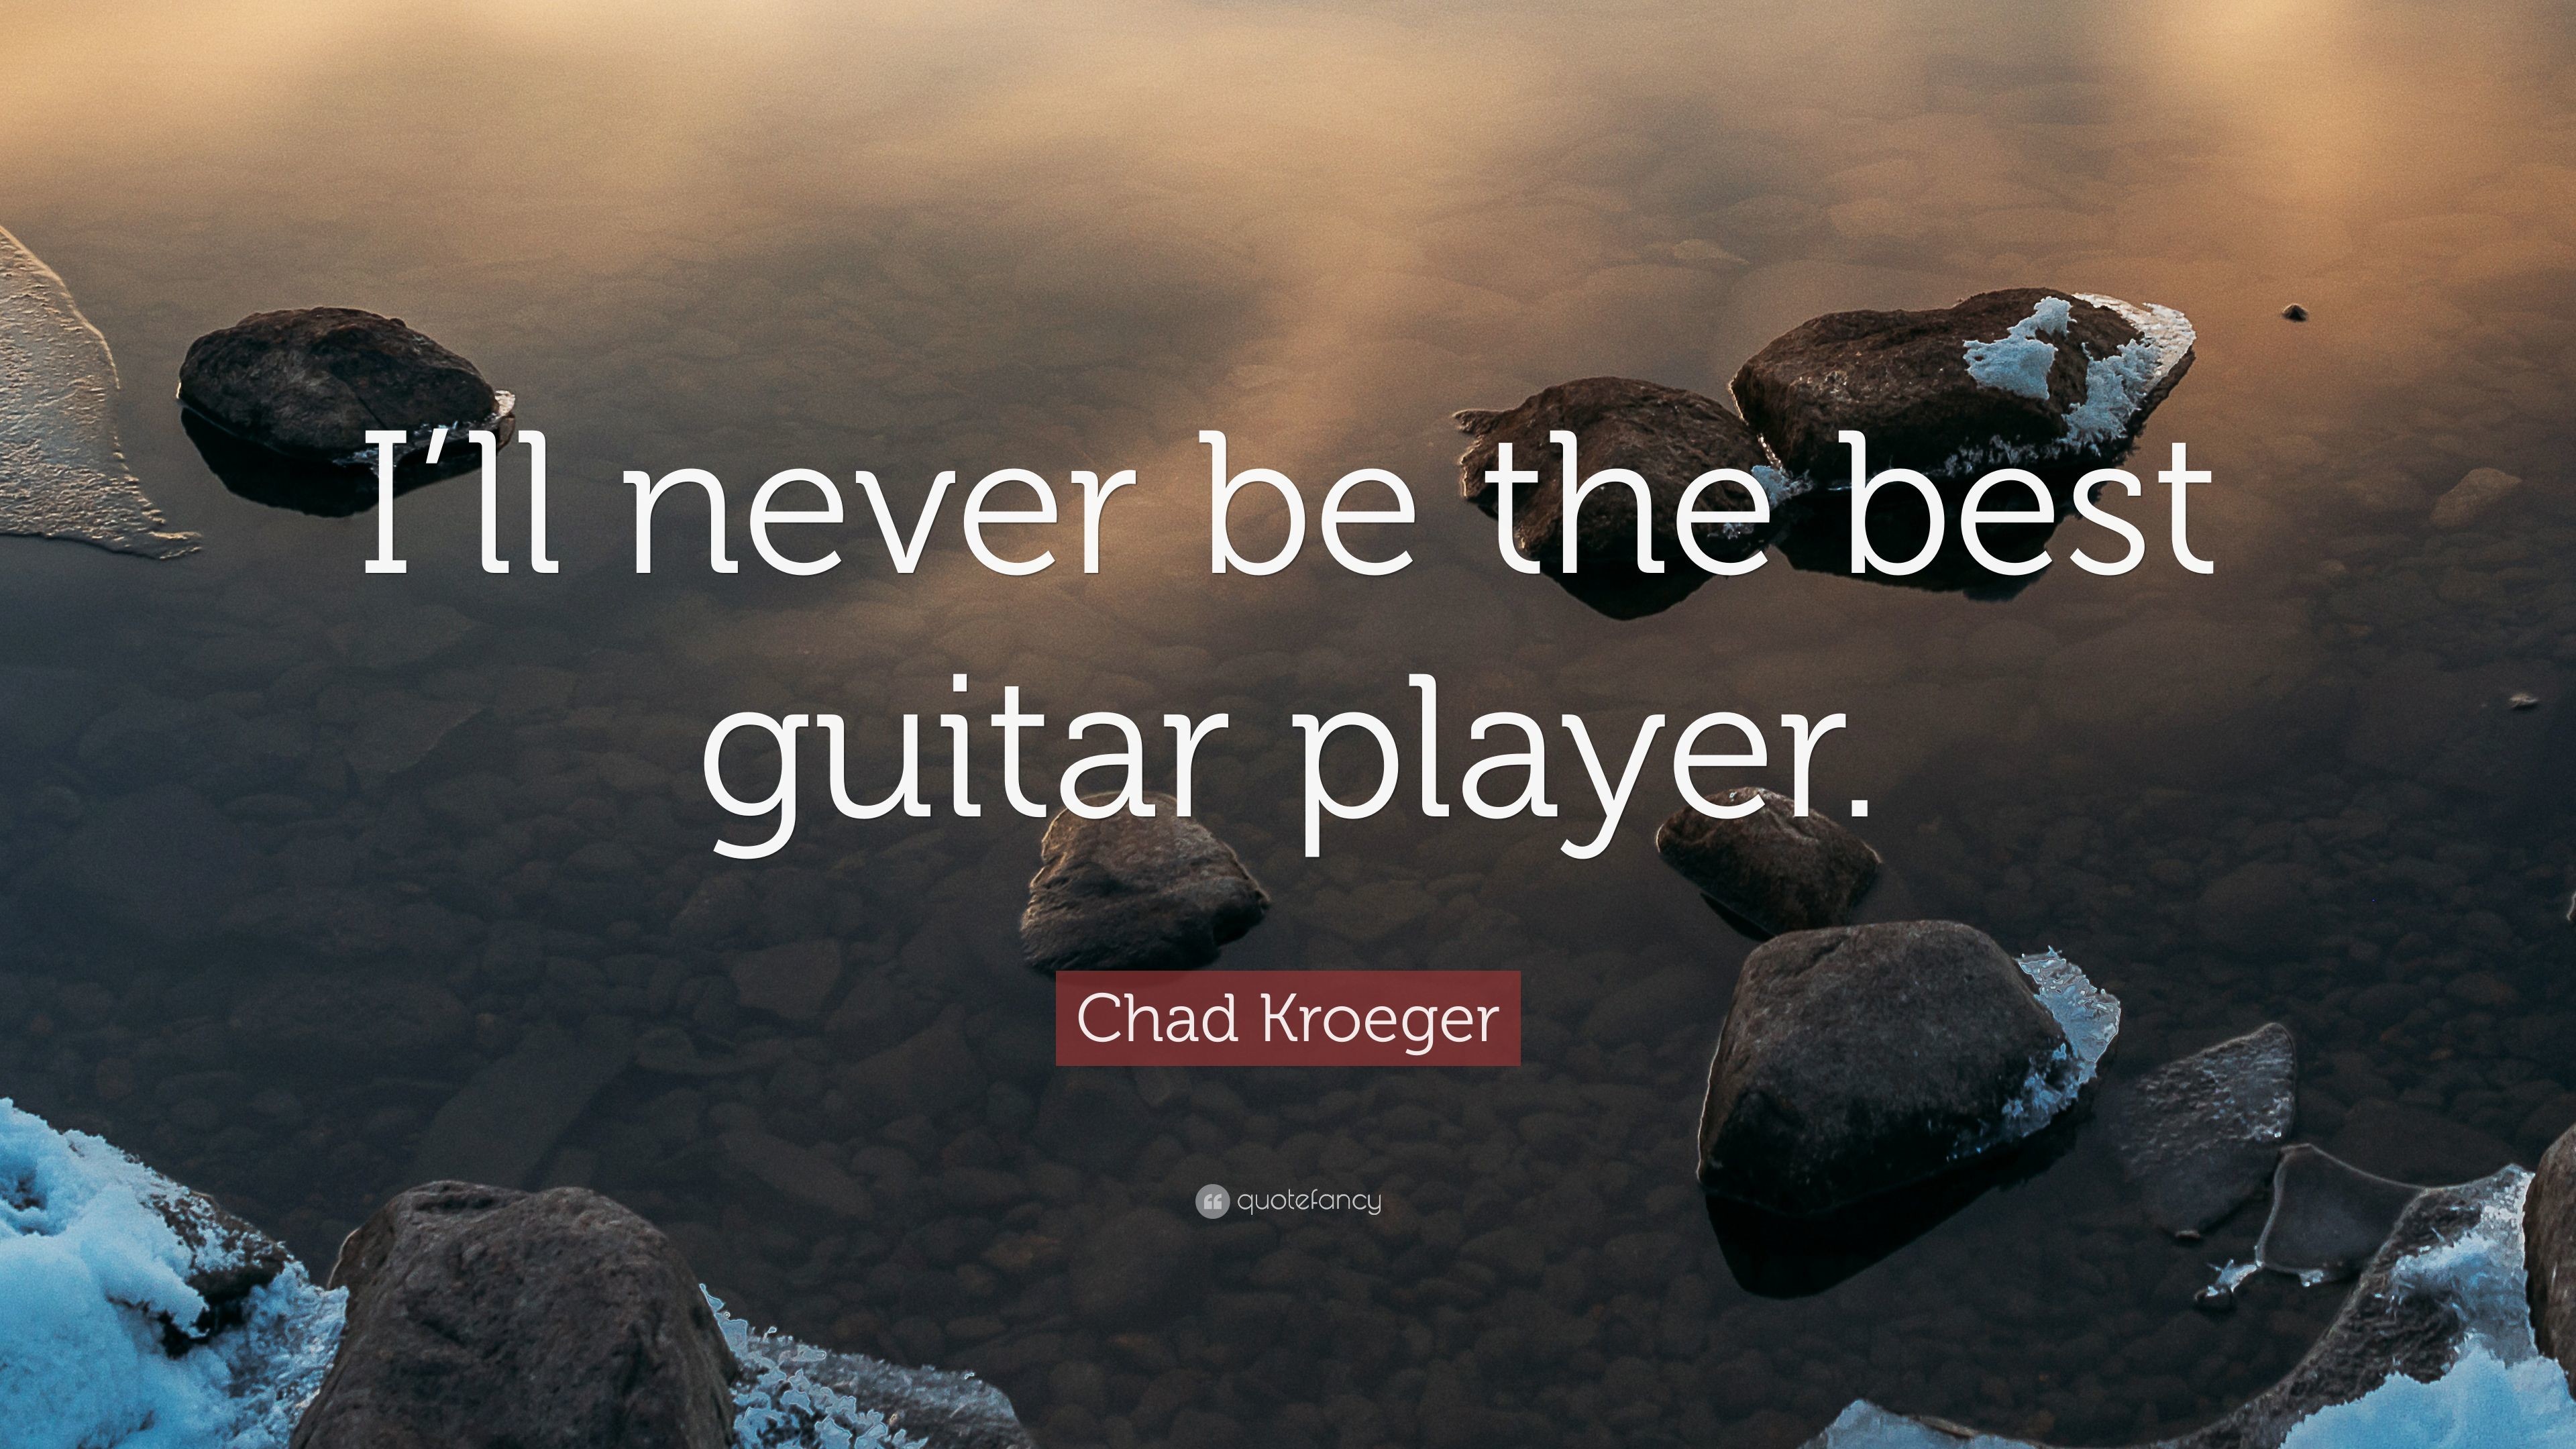 3840x2160 Chad Kroeger Quote: “I'll never be the best guitar player.”